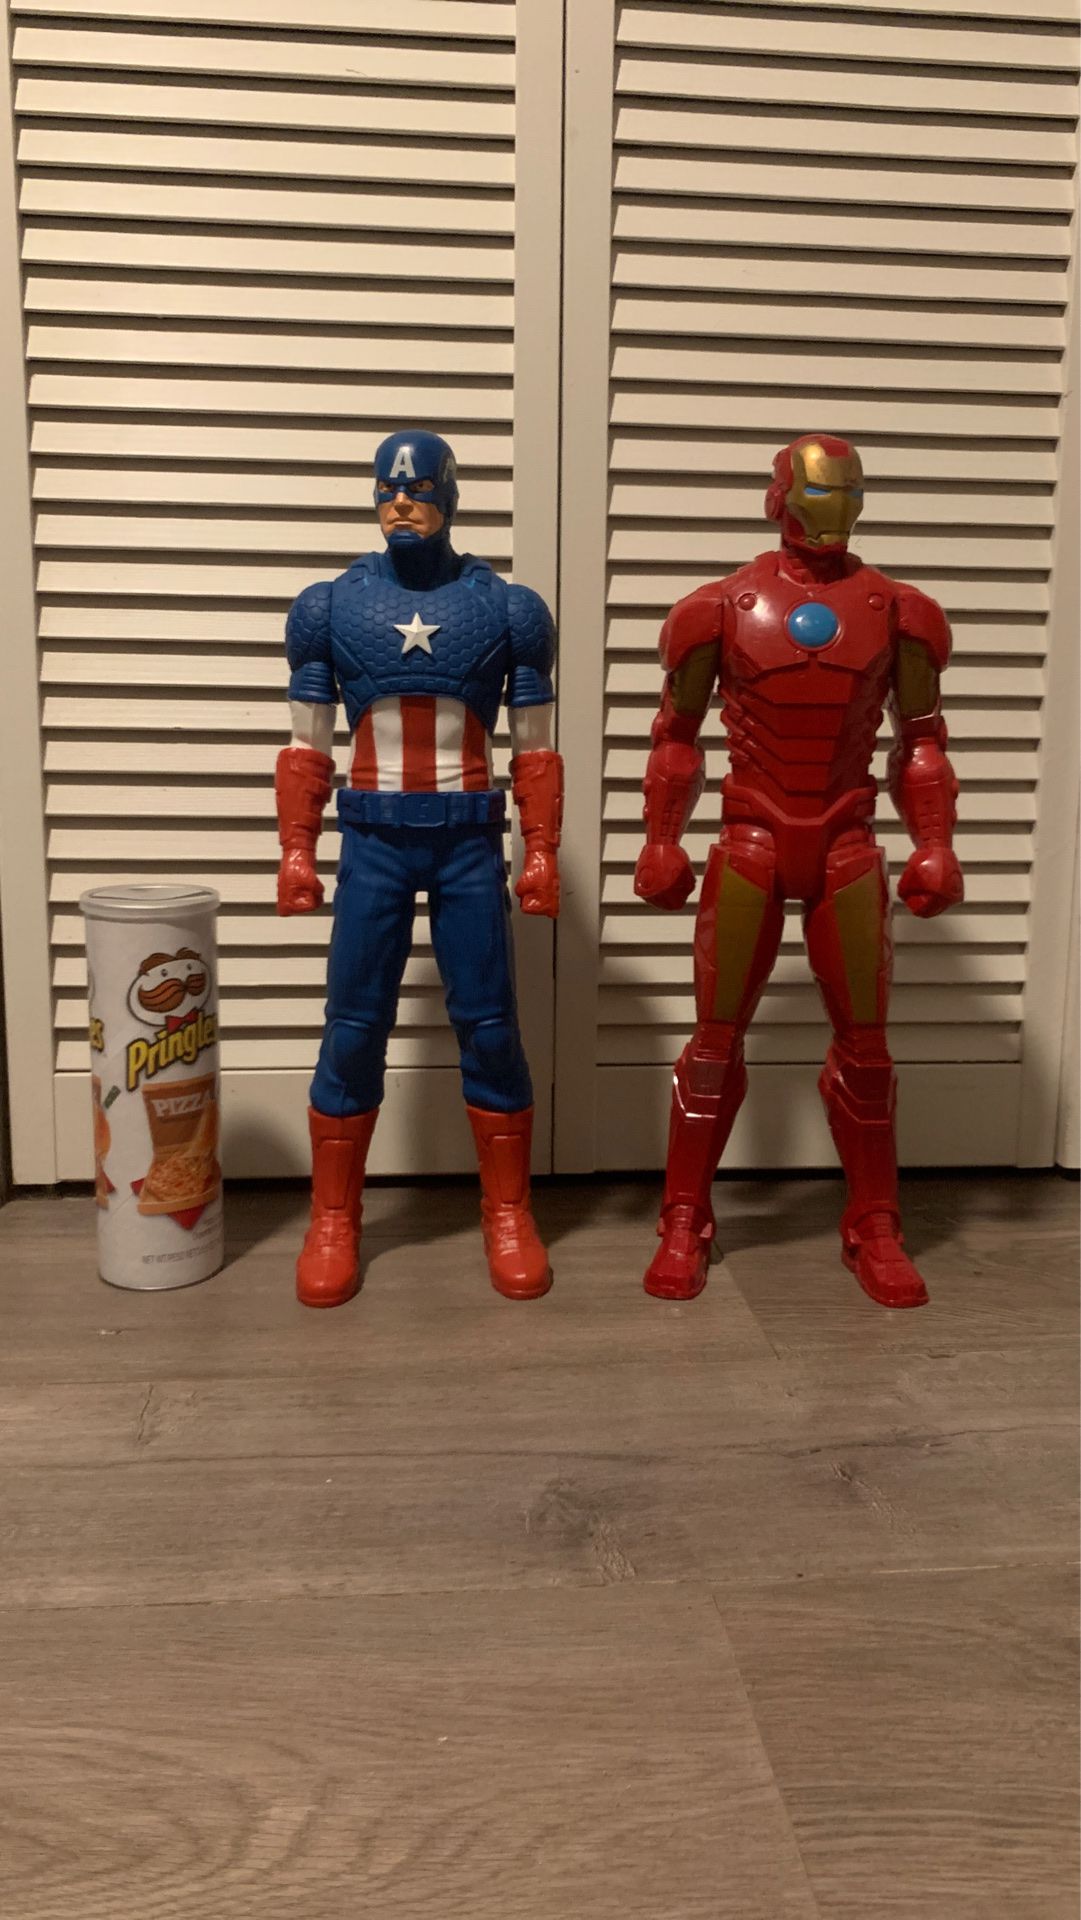 Captain America and Iron man action figures